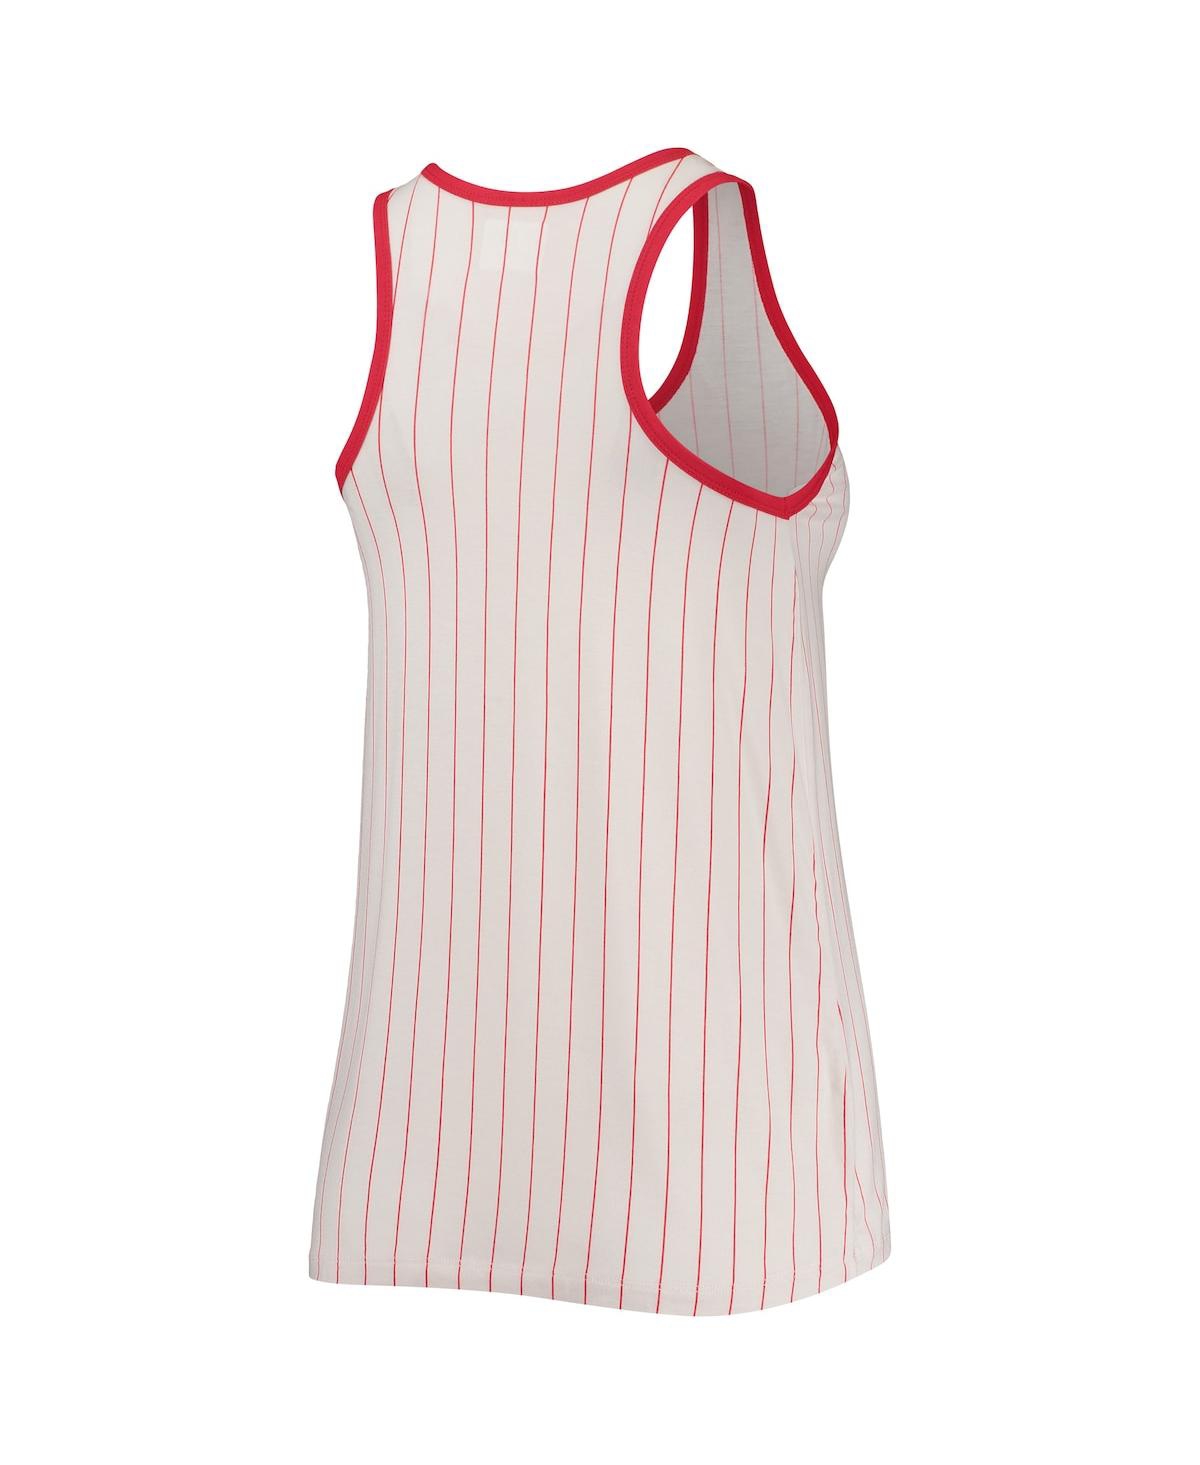 Shop New Era Women's  White And Red Washington Nationals Pinstripe Scoop Neck Tank Top In White,red